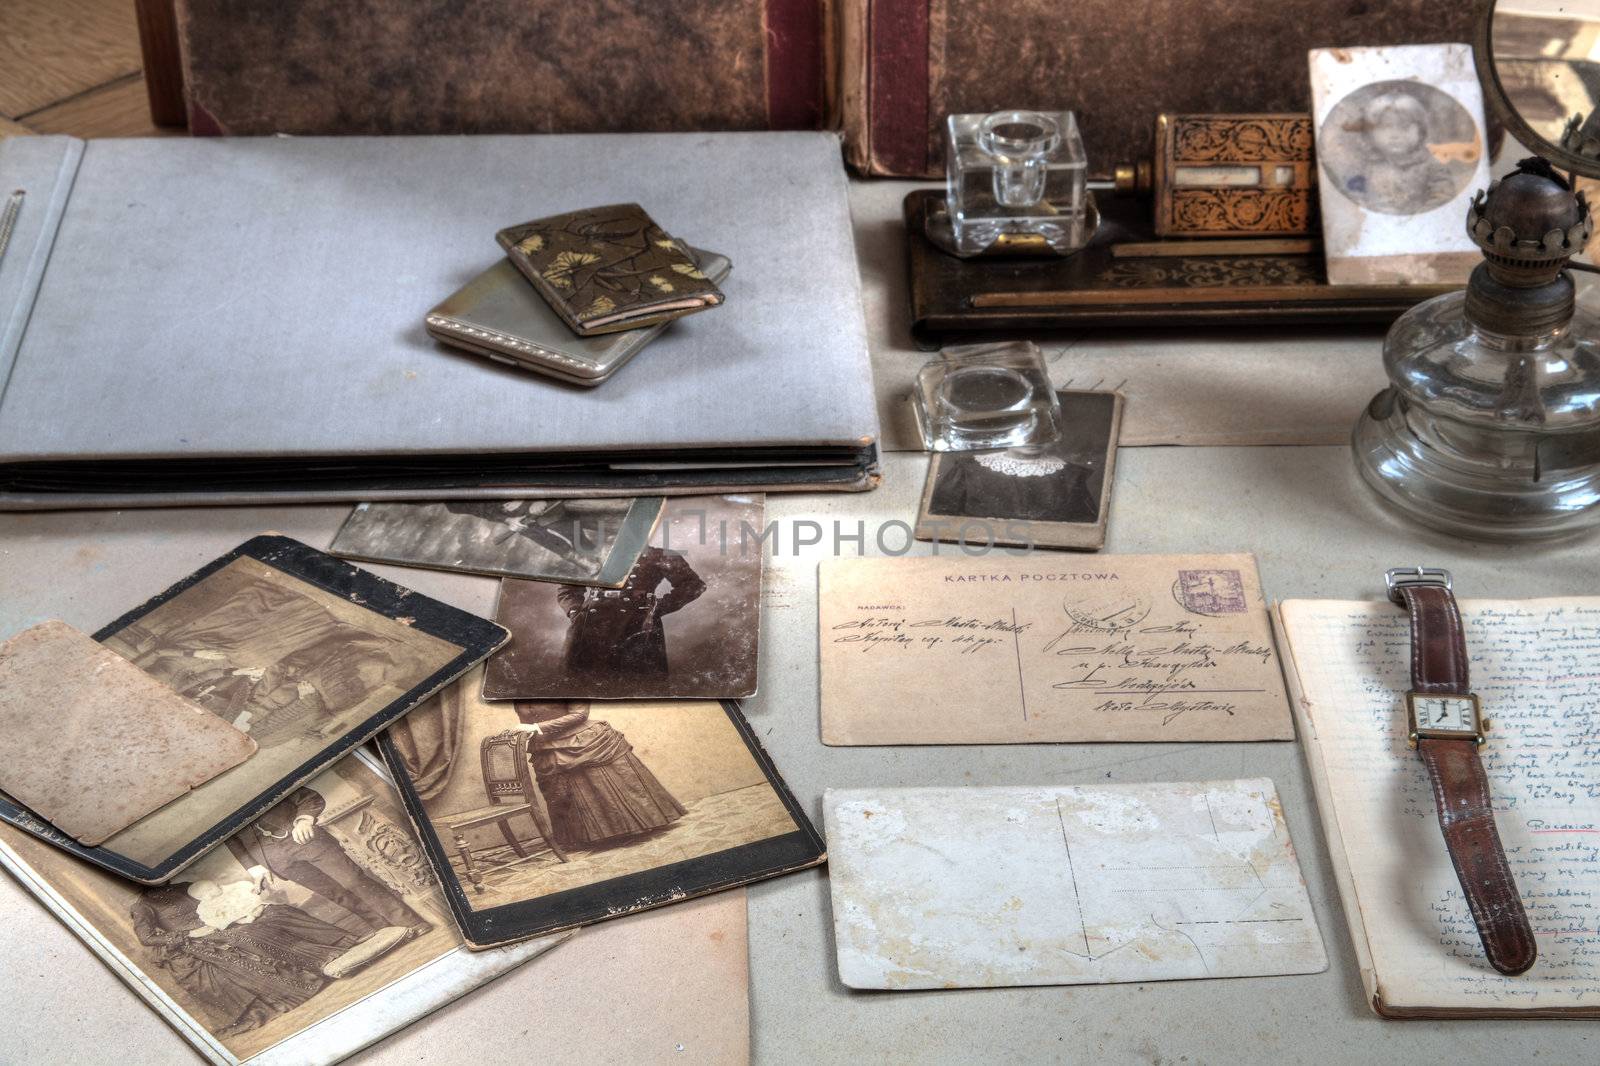 Old photos in sepia,letters,albums,oil-lamp,inkpot and watch.